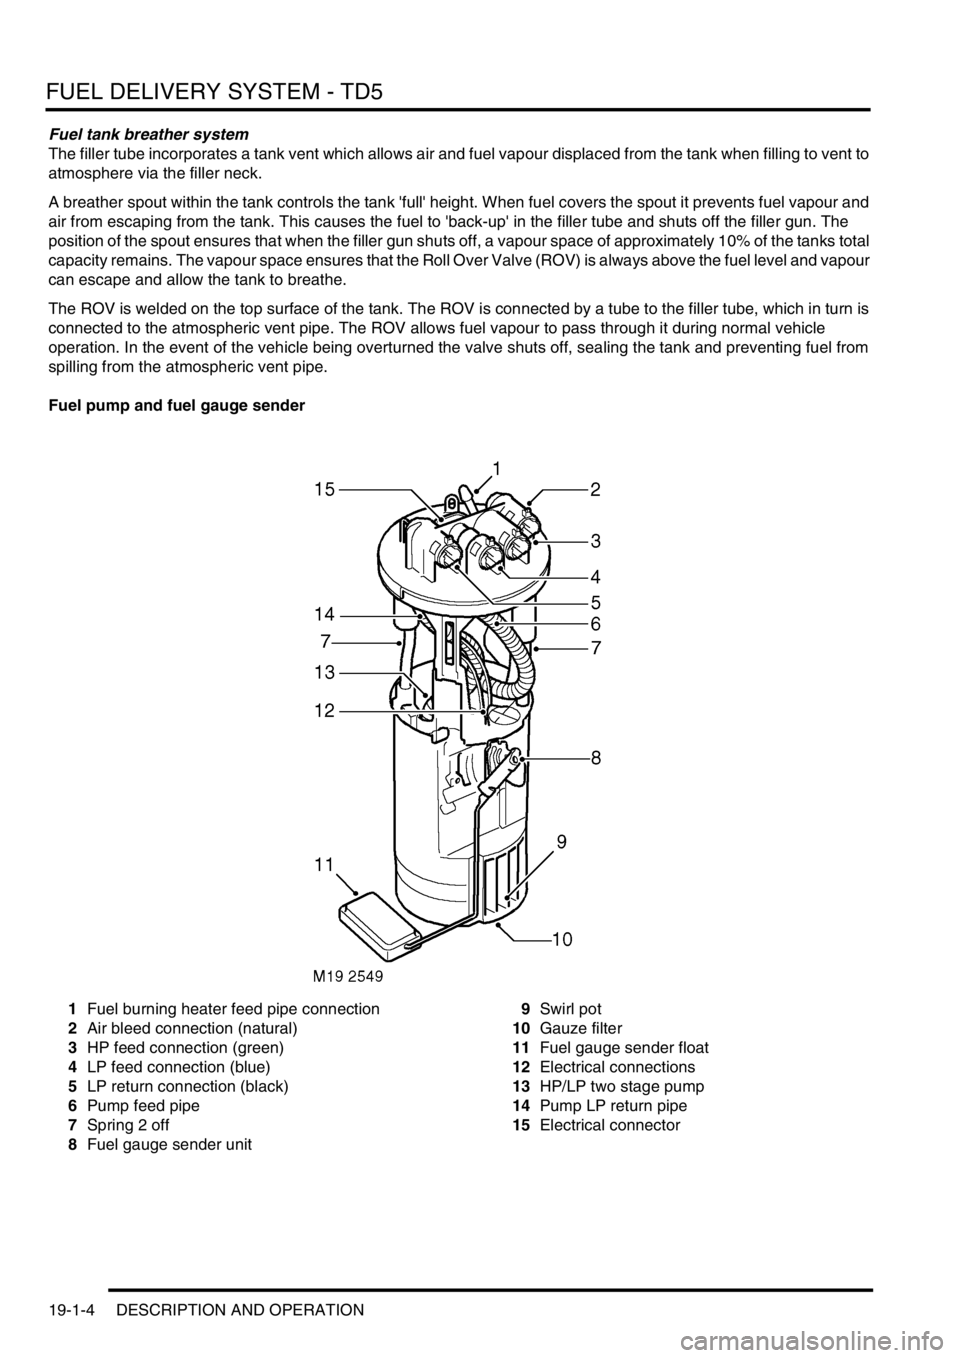 LAND ROVER DISCOVERY 2002  Workshop Manual FUEL DELIVERY SYSTEM - TD5
19-1-4 DESCRIPTION AND OPERATION
Fuel tank breather system
The filler tube incorporates a tank vent which allows air and fuel vapour displaced from the tank when filling to 